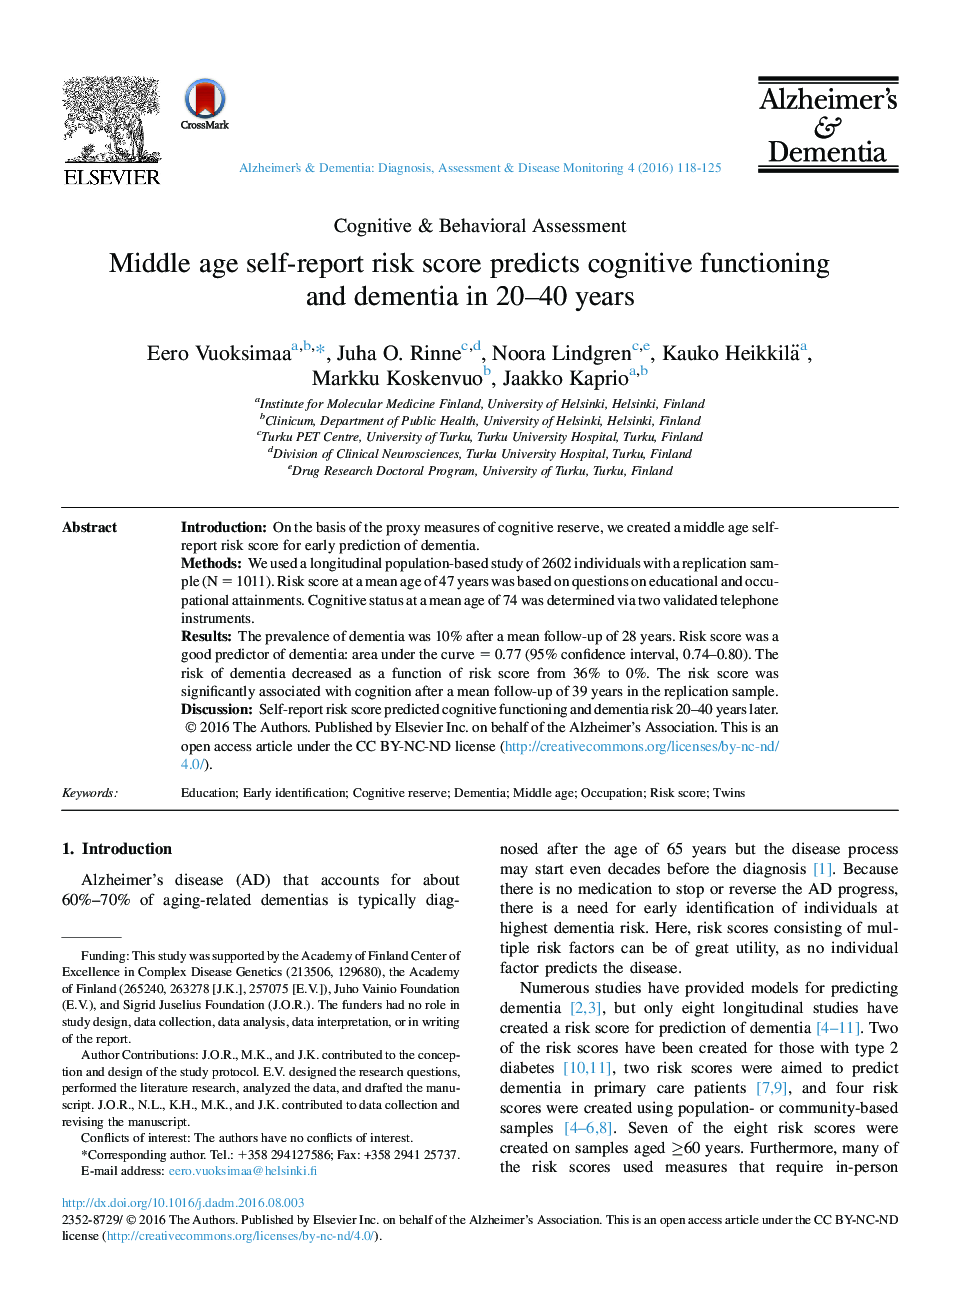 Middle age self-report risk score predicts cognitive functioning and dementia in 20-40Â years